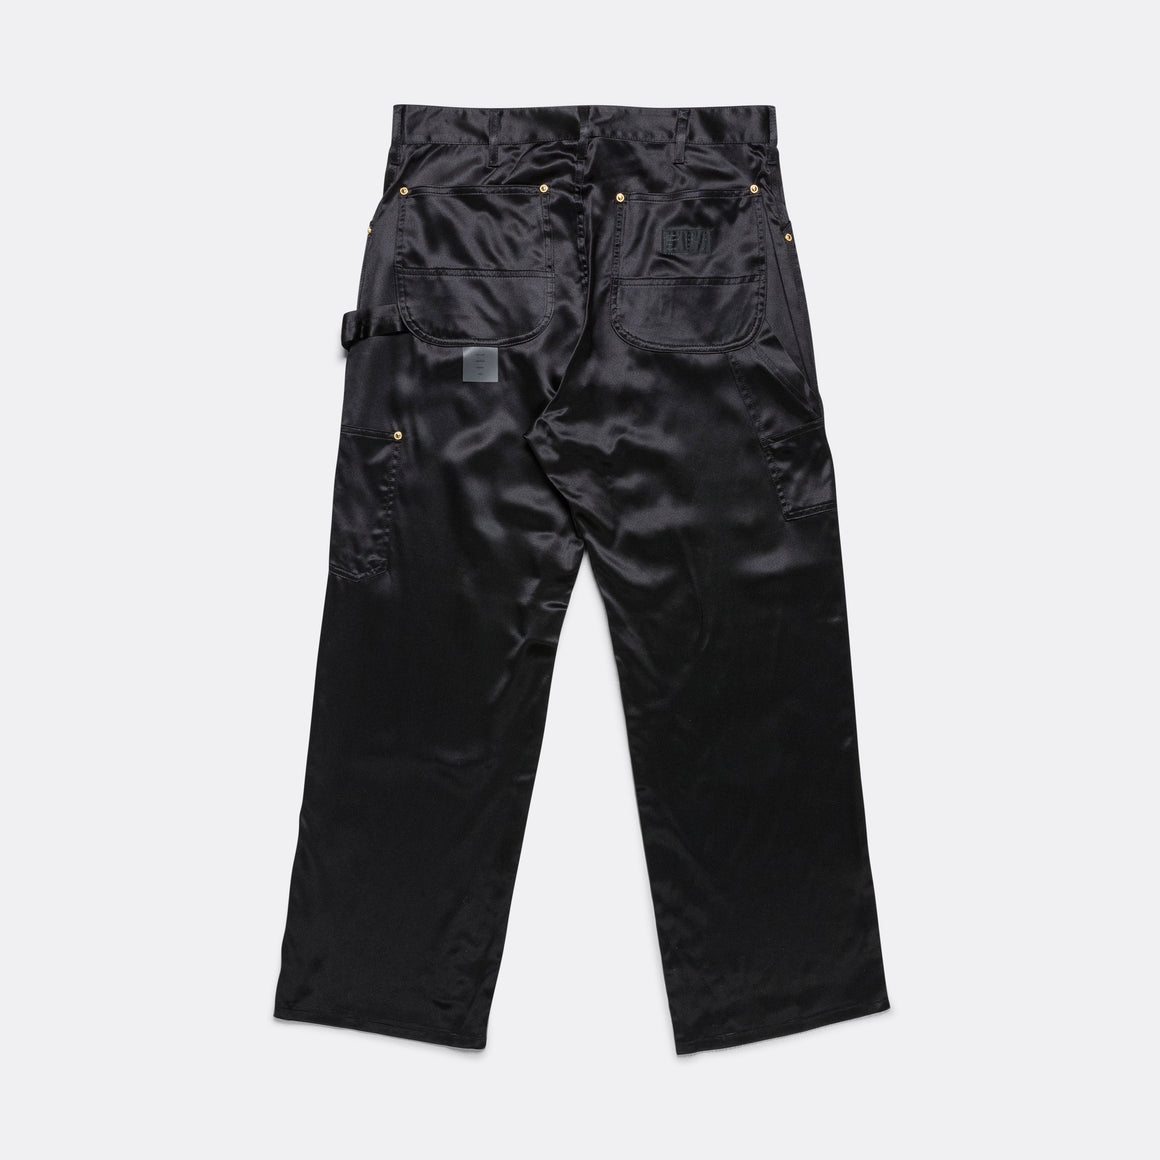 4SDesigns - W Utility Pant - Black All Silk Sateen - UP THERE